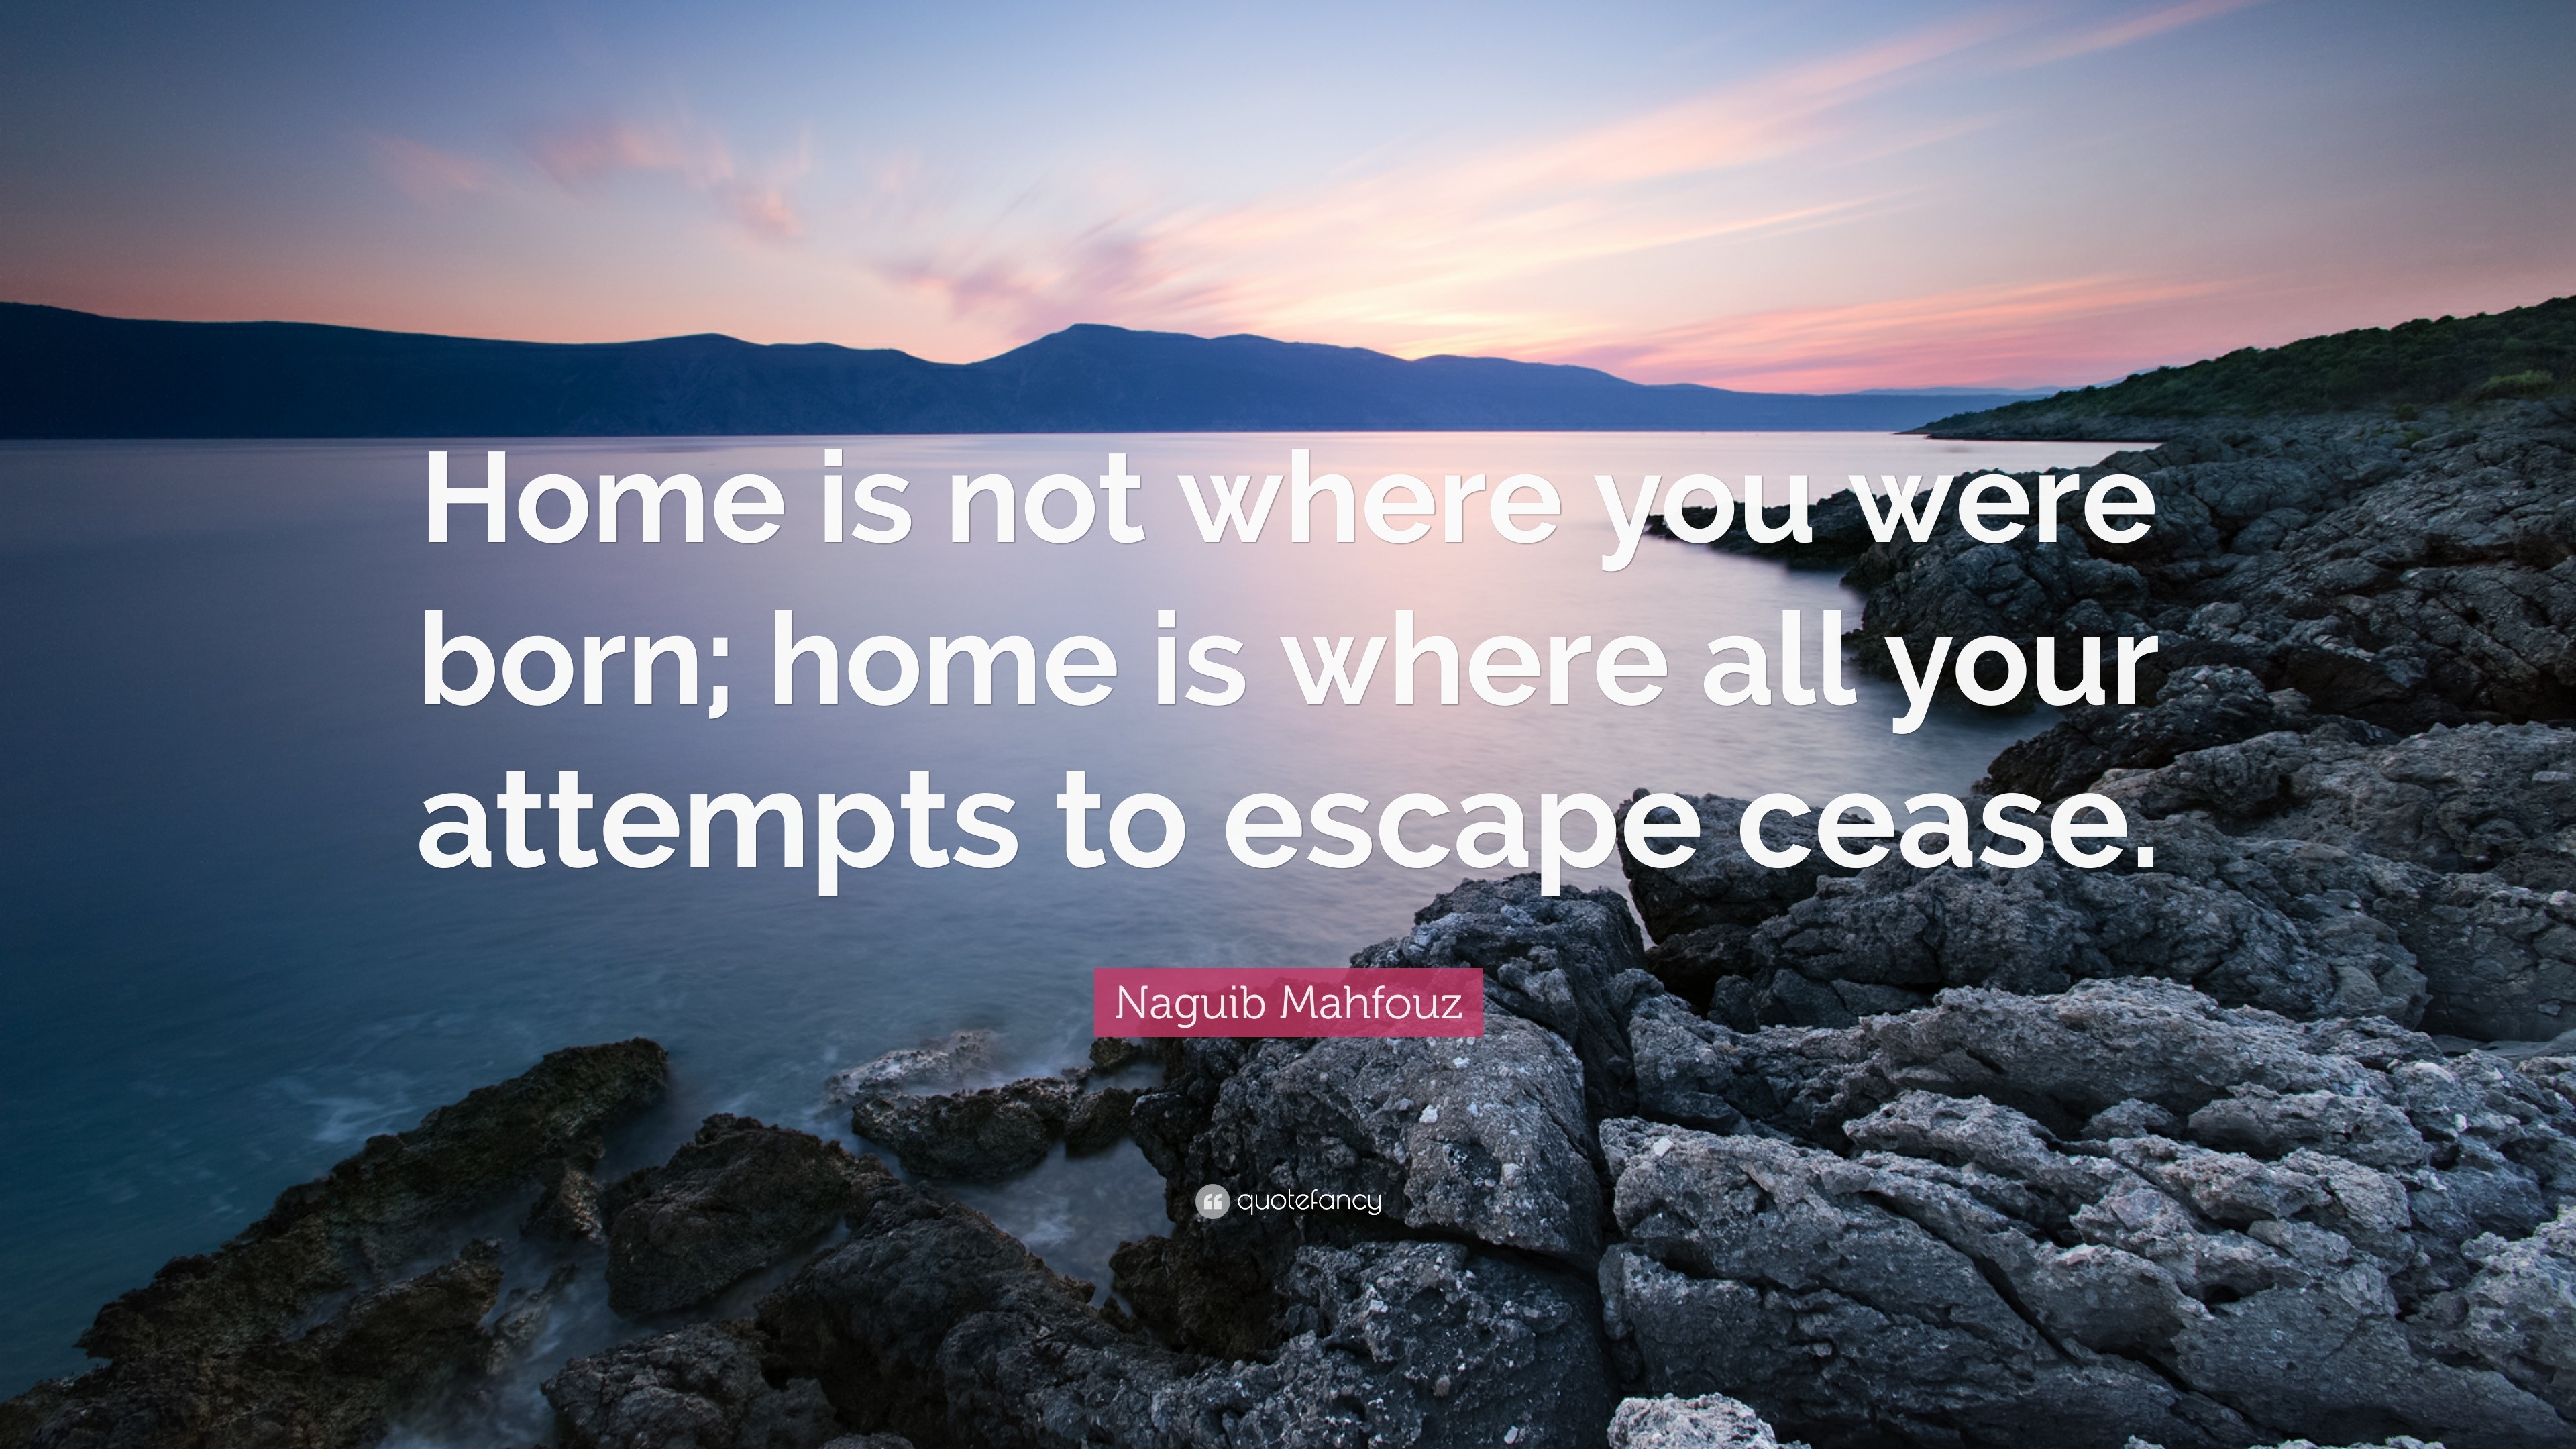 Home is not where you were born; home is where all your attempts